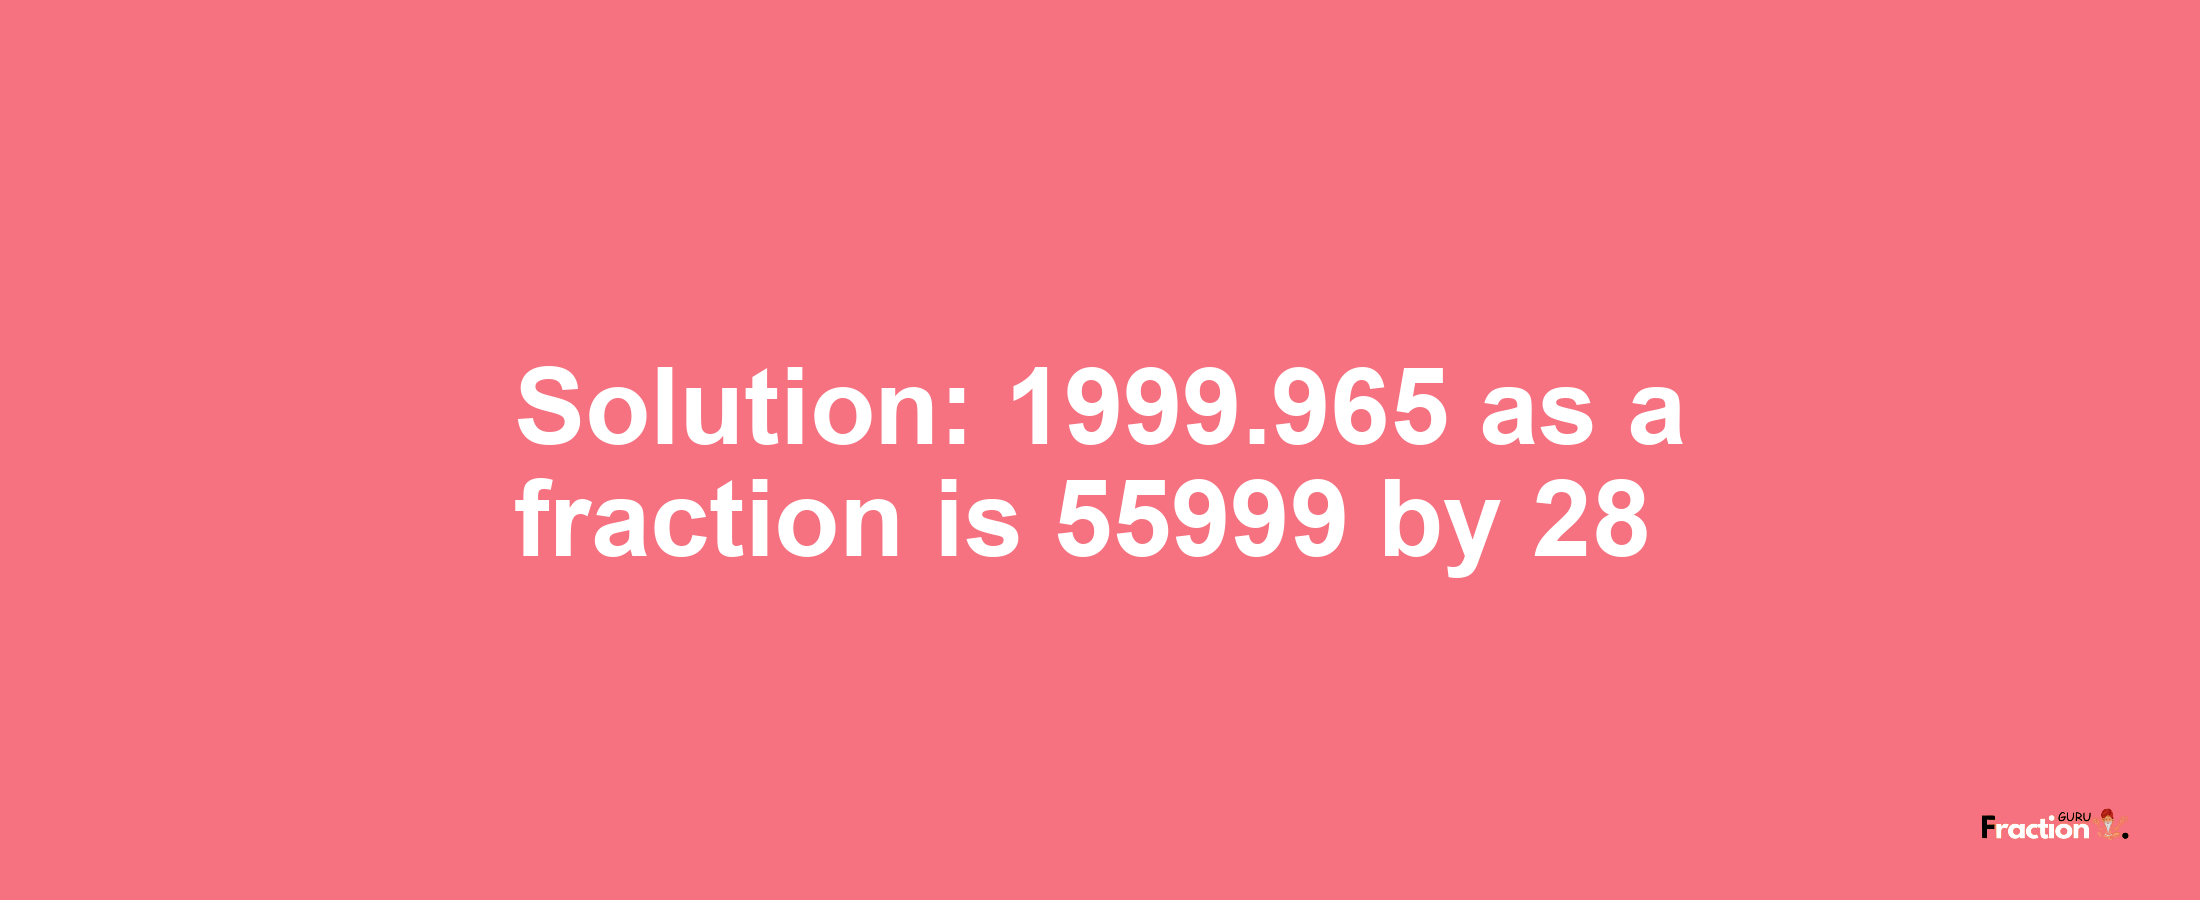 Solution:1999.965 as a fraction is 55999/28